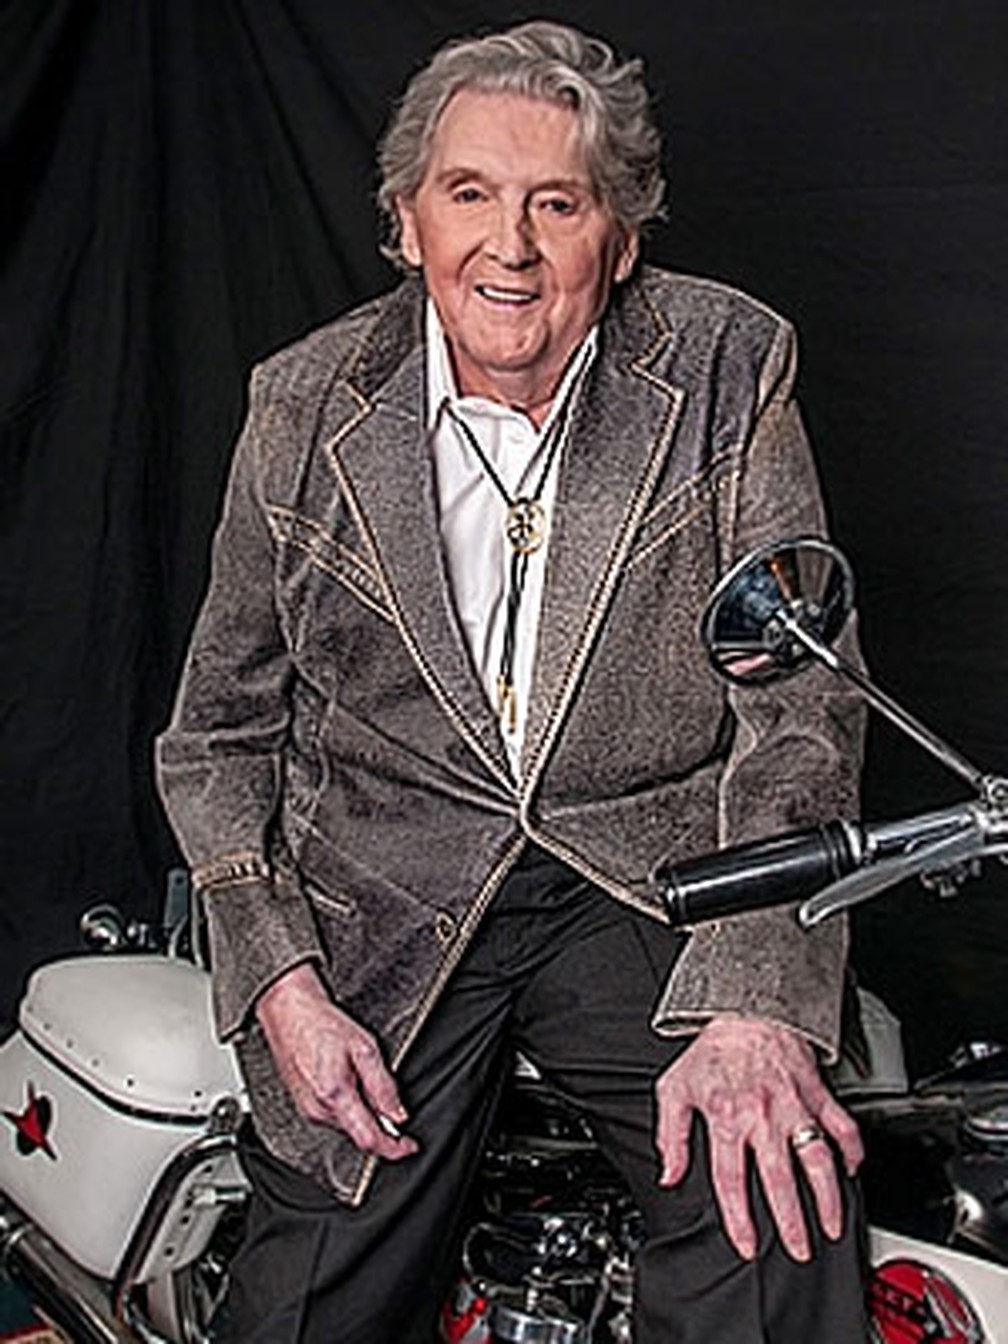 Jerry Lee Lewis sold his 1959 Harley-Davidson – Photo: Disclosure